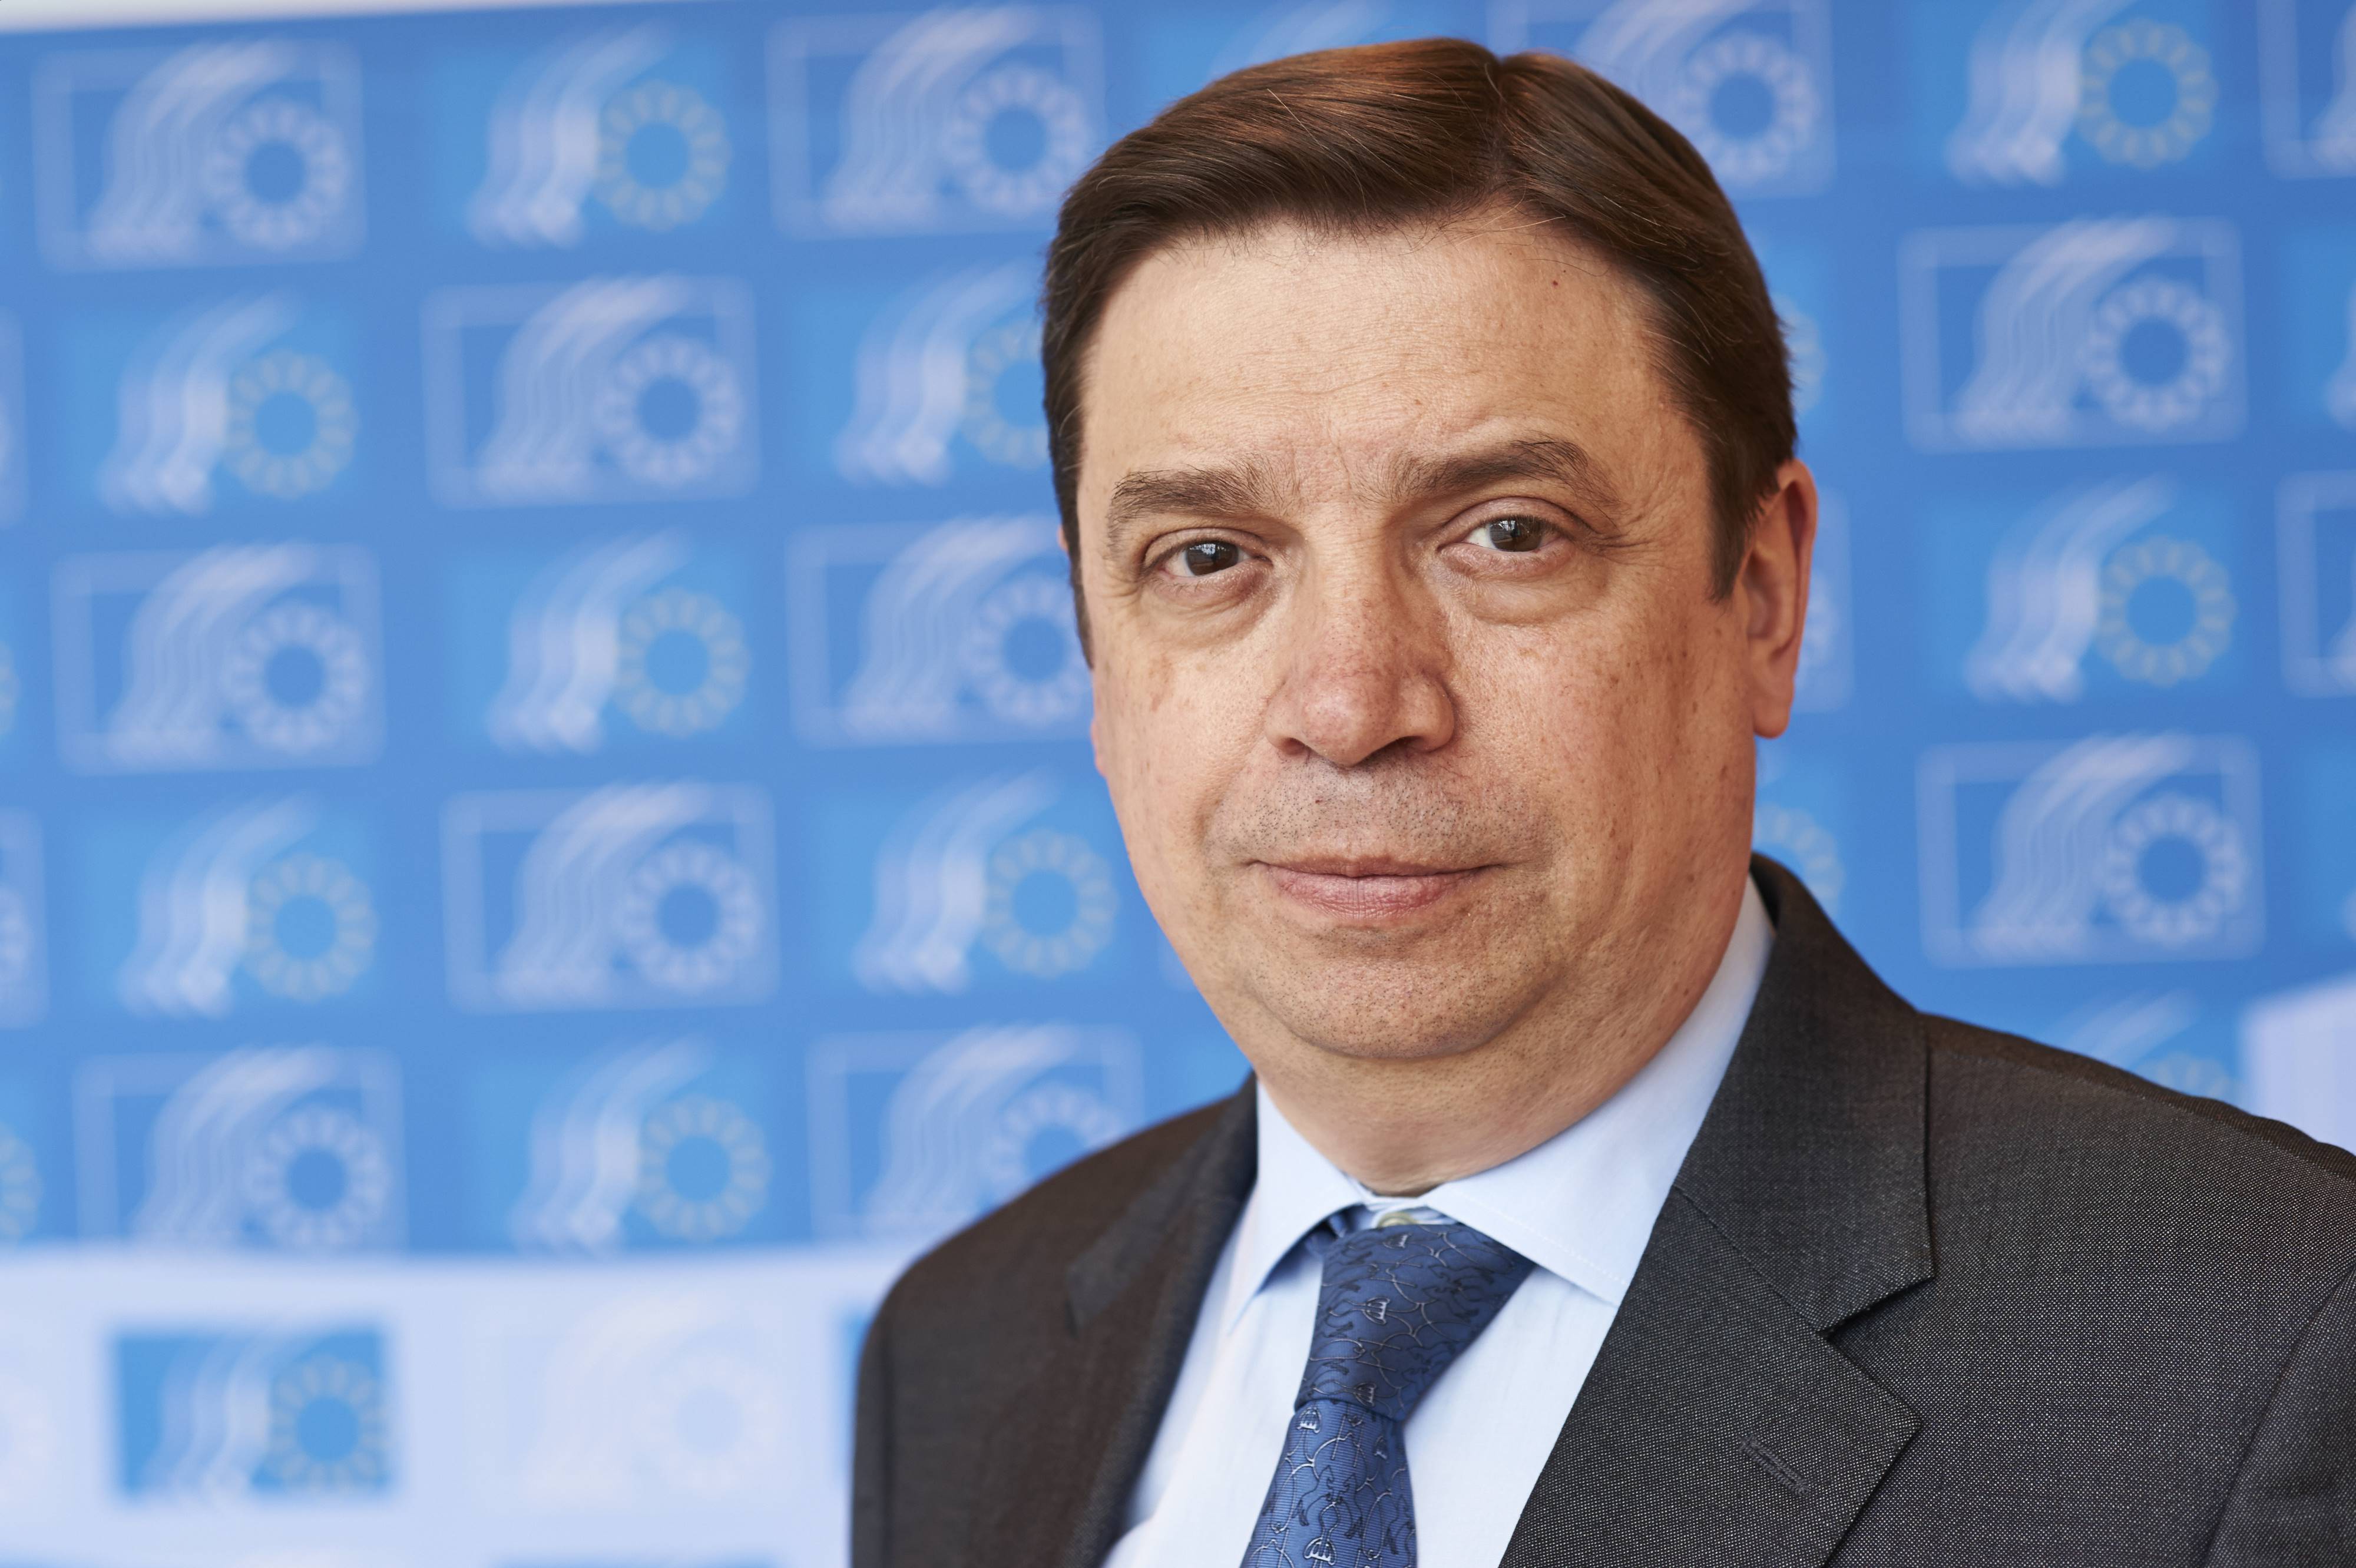 Luis Planas, secretary-general of the EESC, appointed minister in the government of Pedro Sánchez in Spain | European Economic and Social Committee